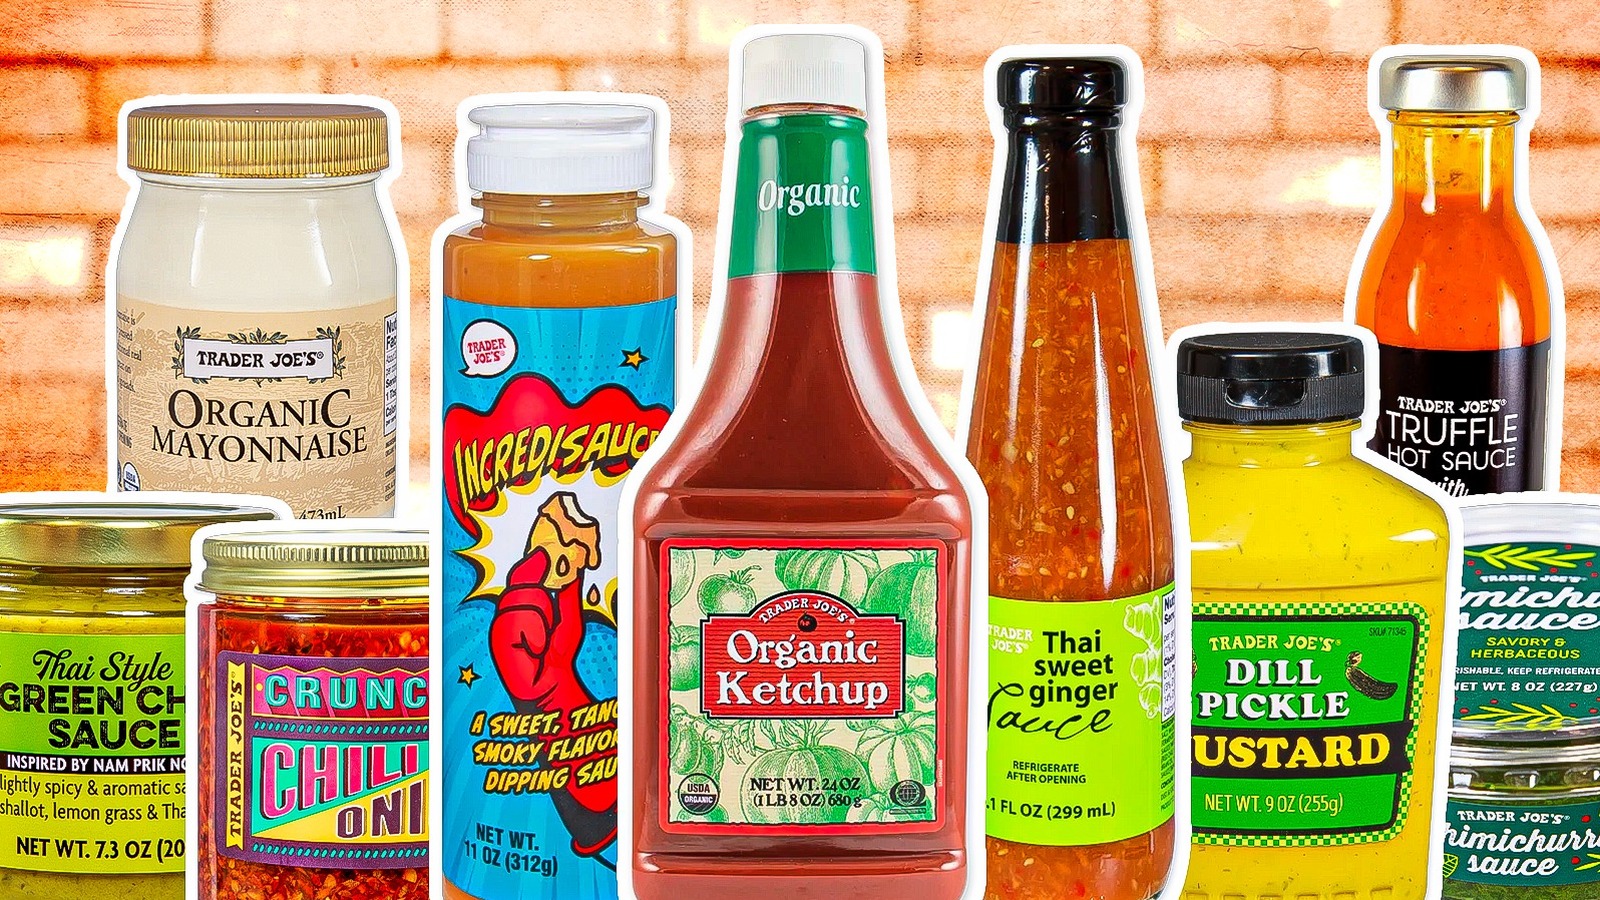 https://www.thedailymeal.com/img/gallery/the-15-best-condiments-at-trader-joes/l-intro-1687379597.jpg